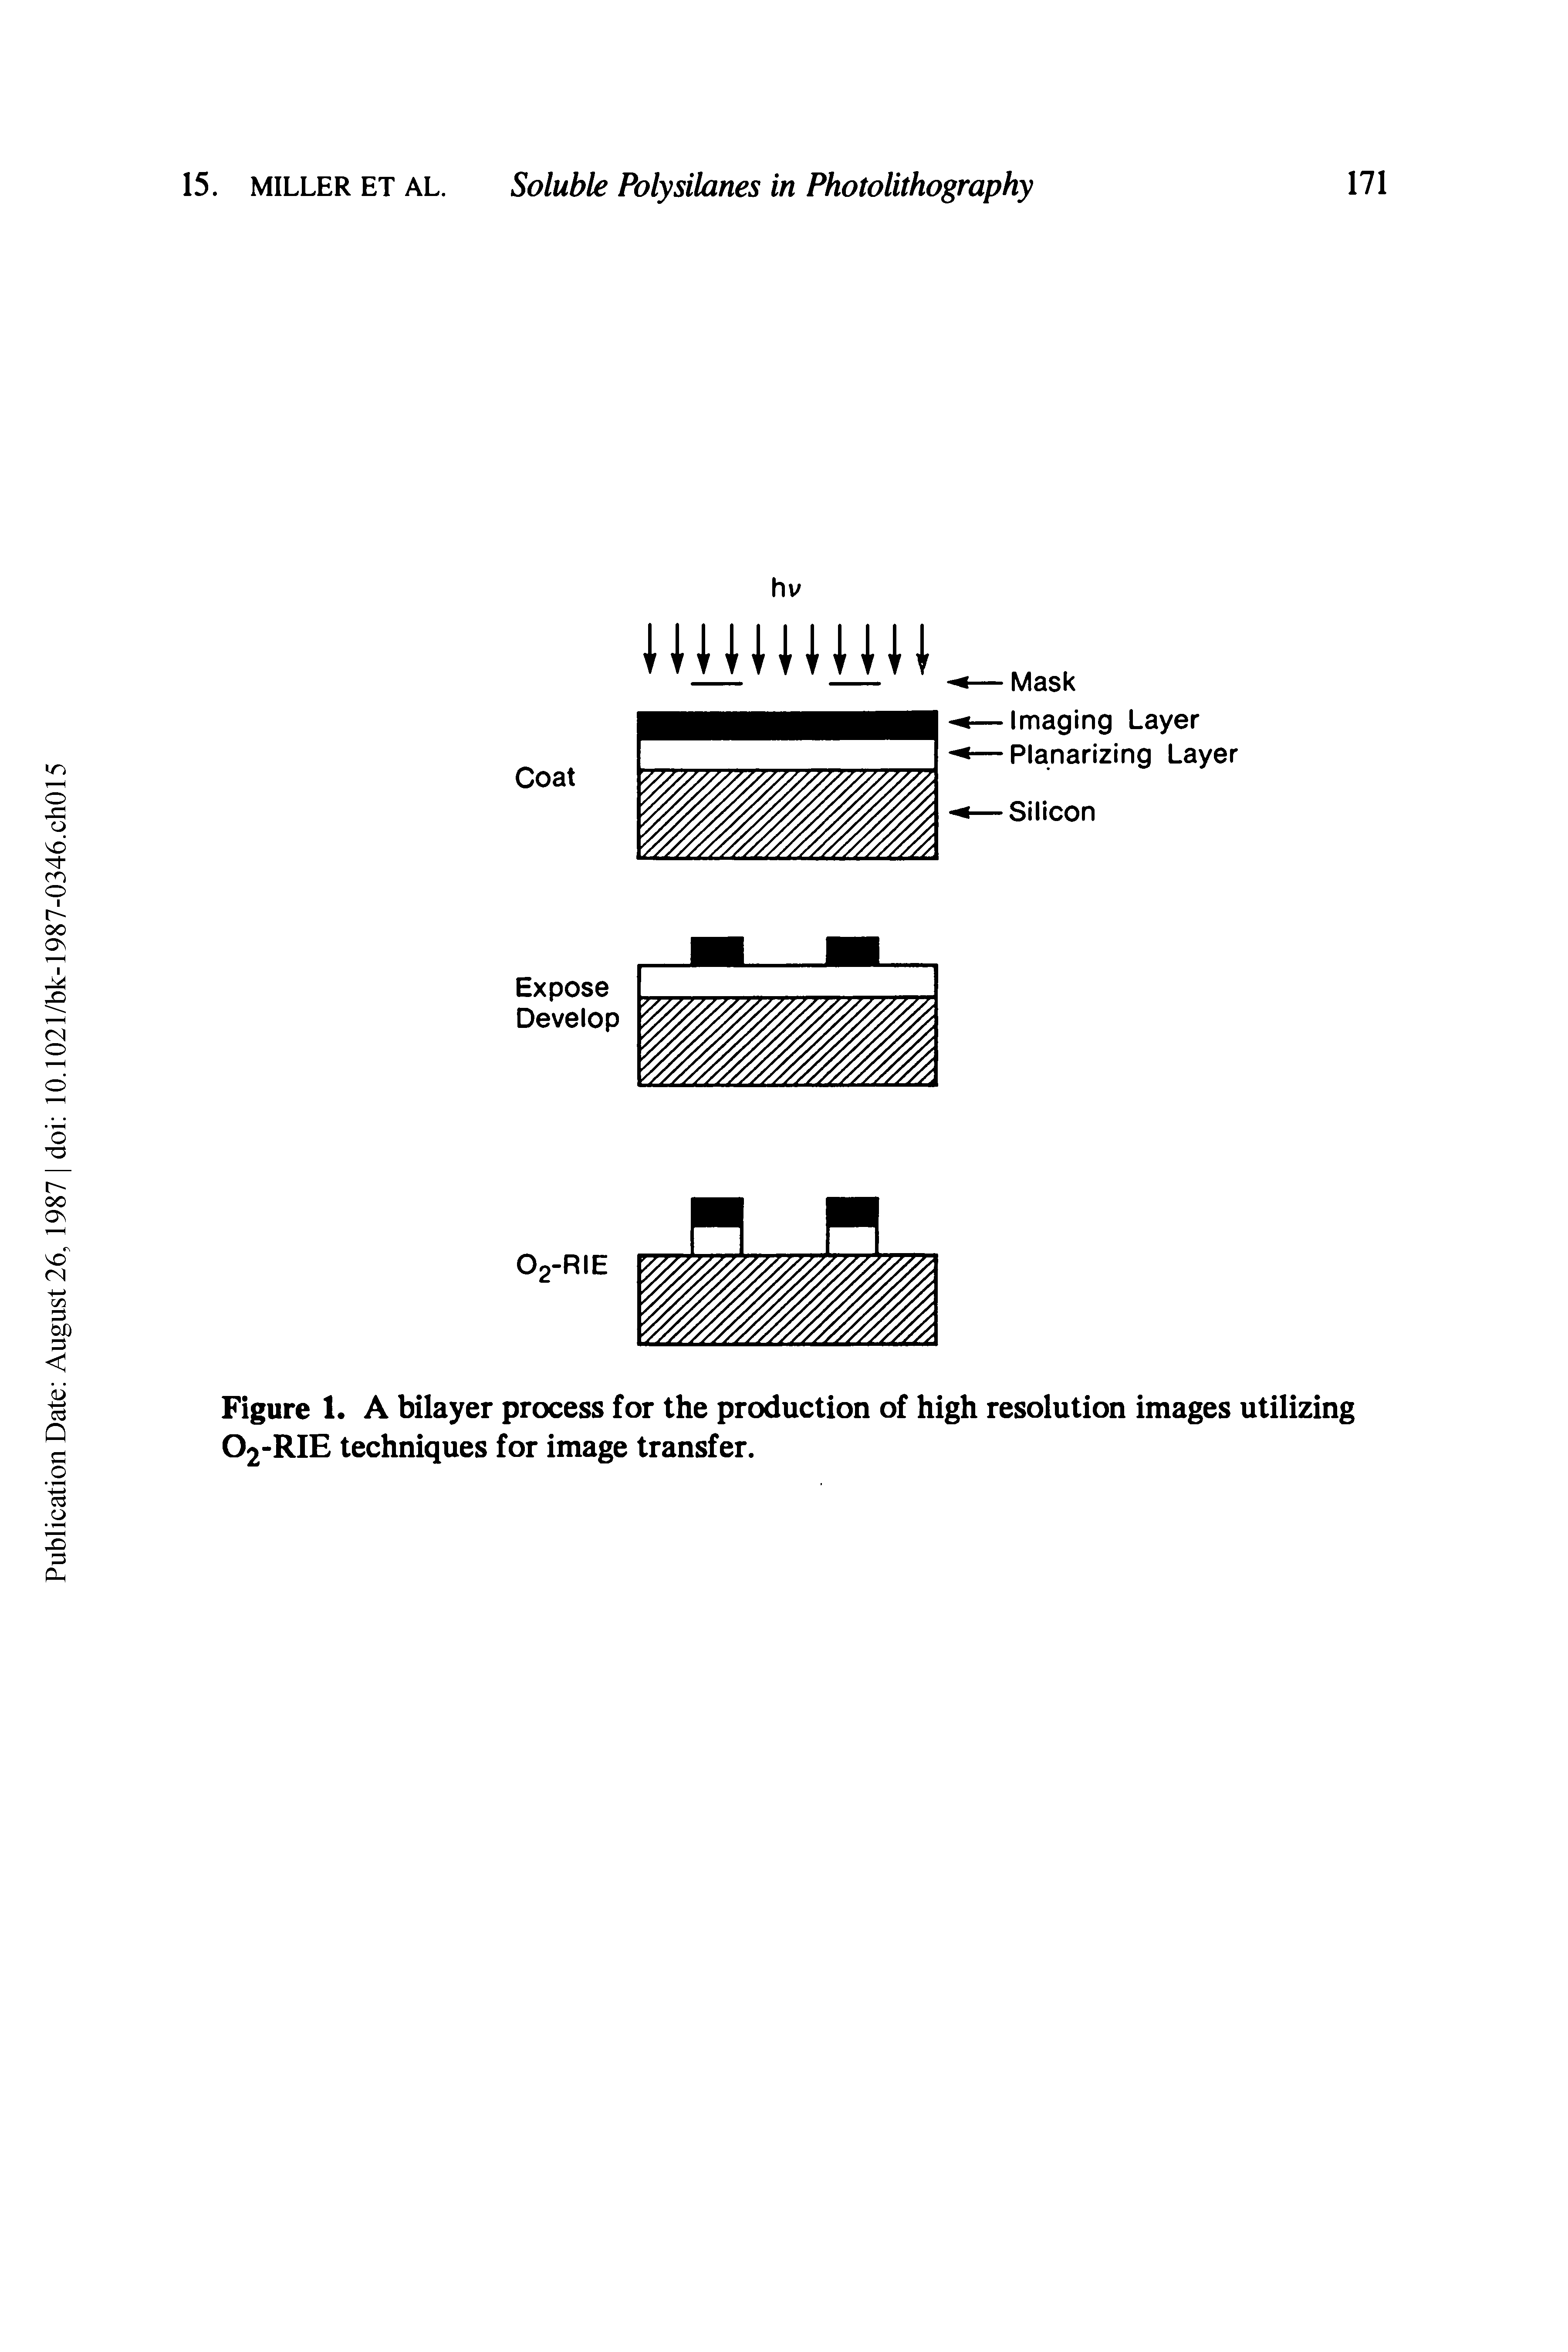 Figure 1. A bilayer process for the production of high resolution images utilizing O2-RIE techniques for image transfer.